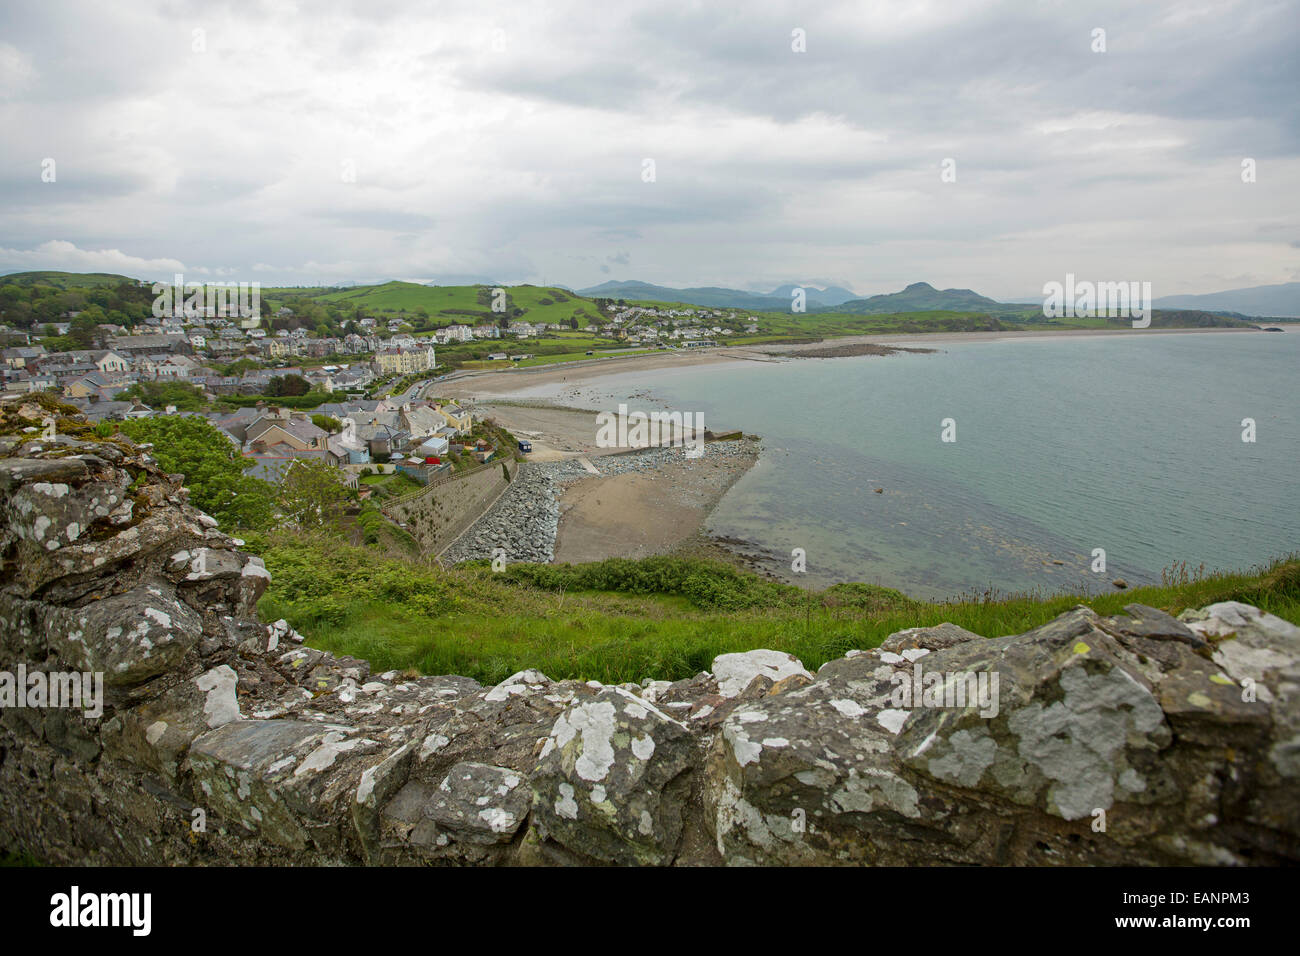 View, from hilltop castle, of Welsh town of Criccieth by beach of Cardigan Bay & green fields stretching to distant mountains Stock Photo